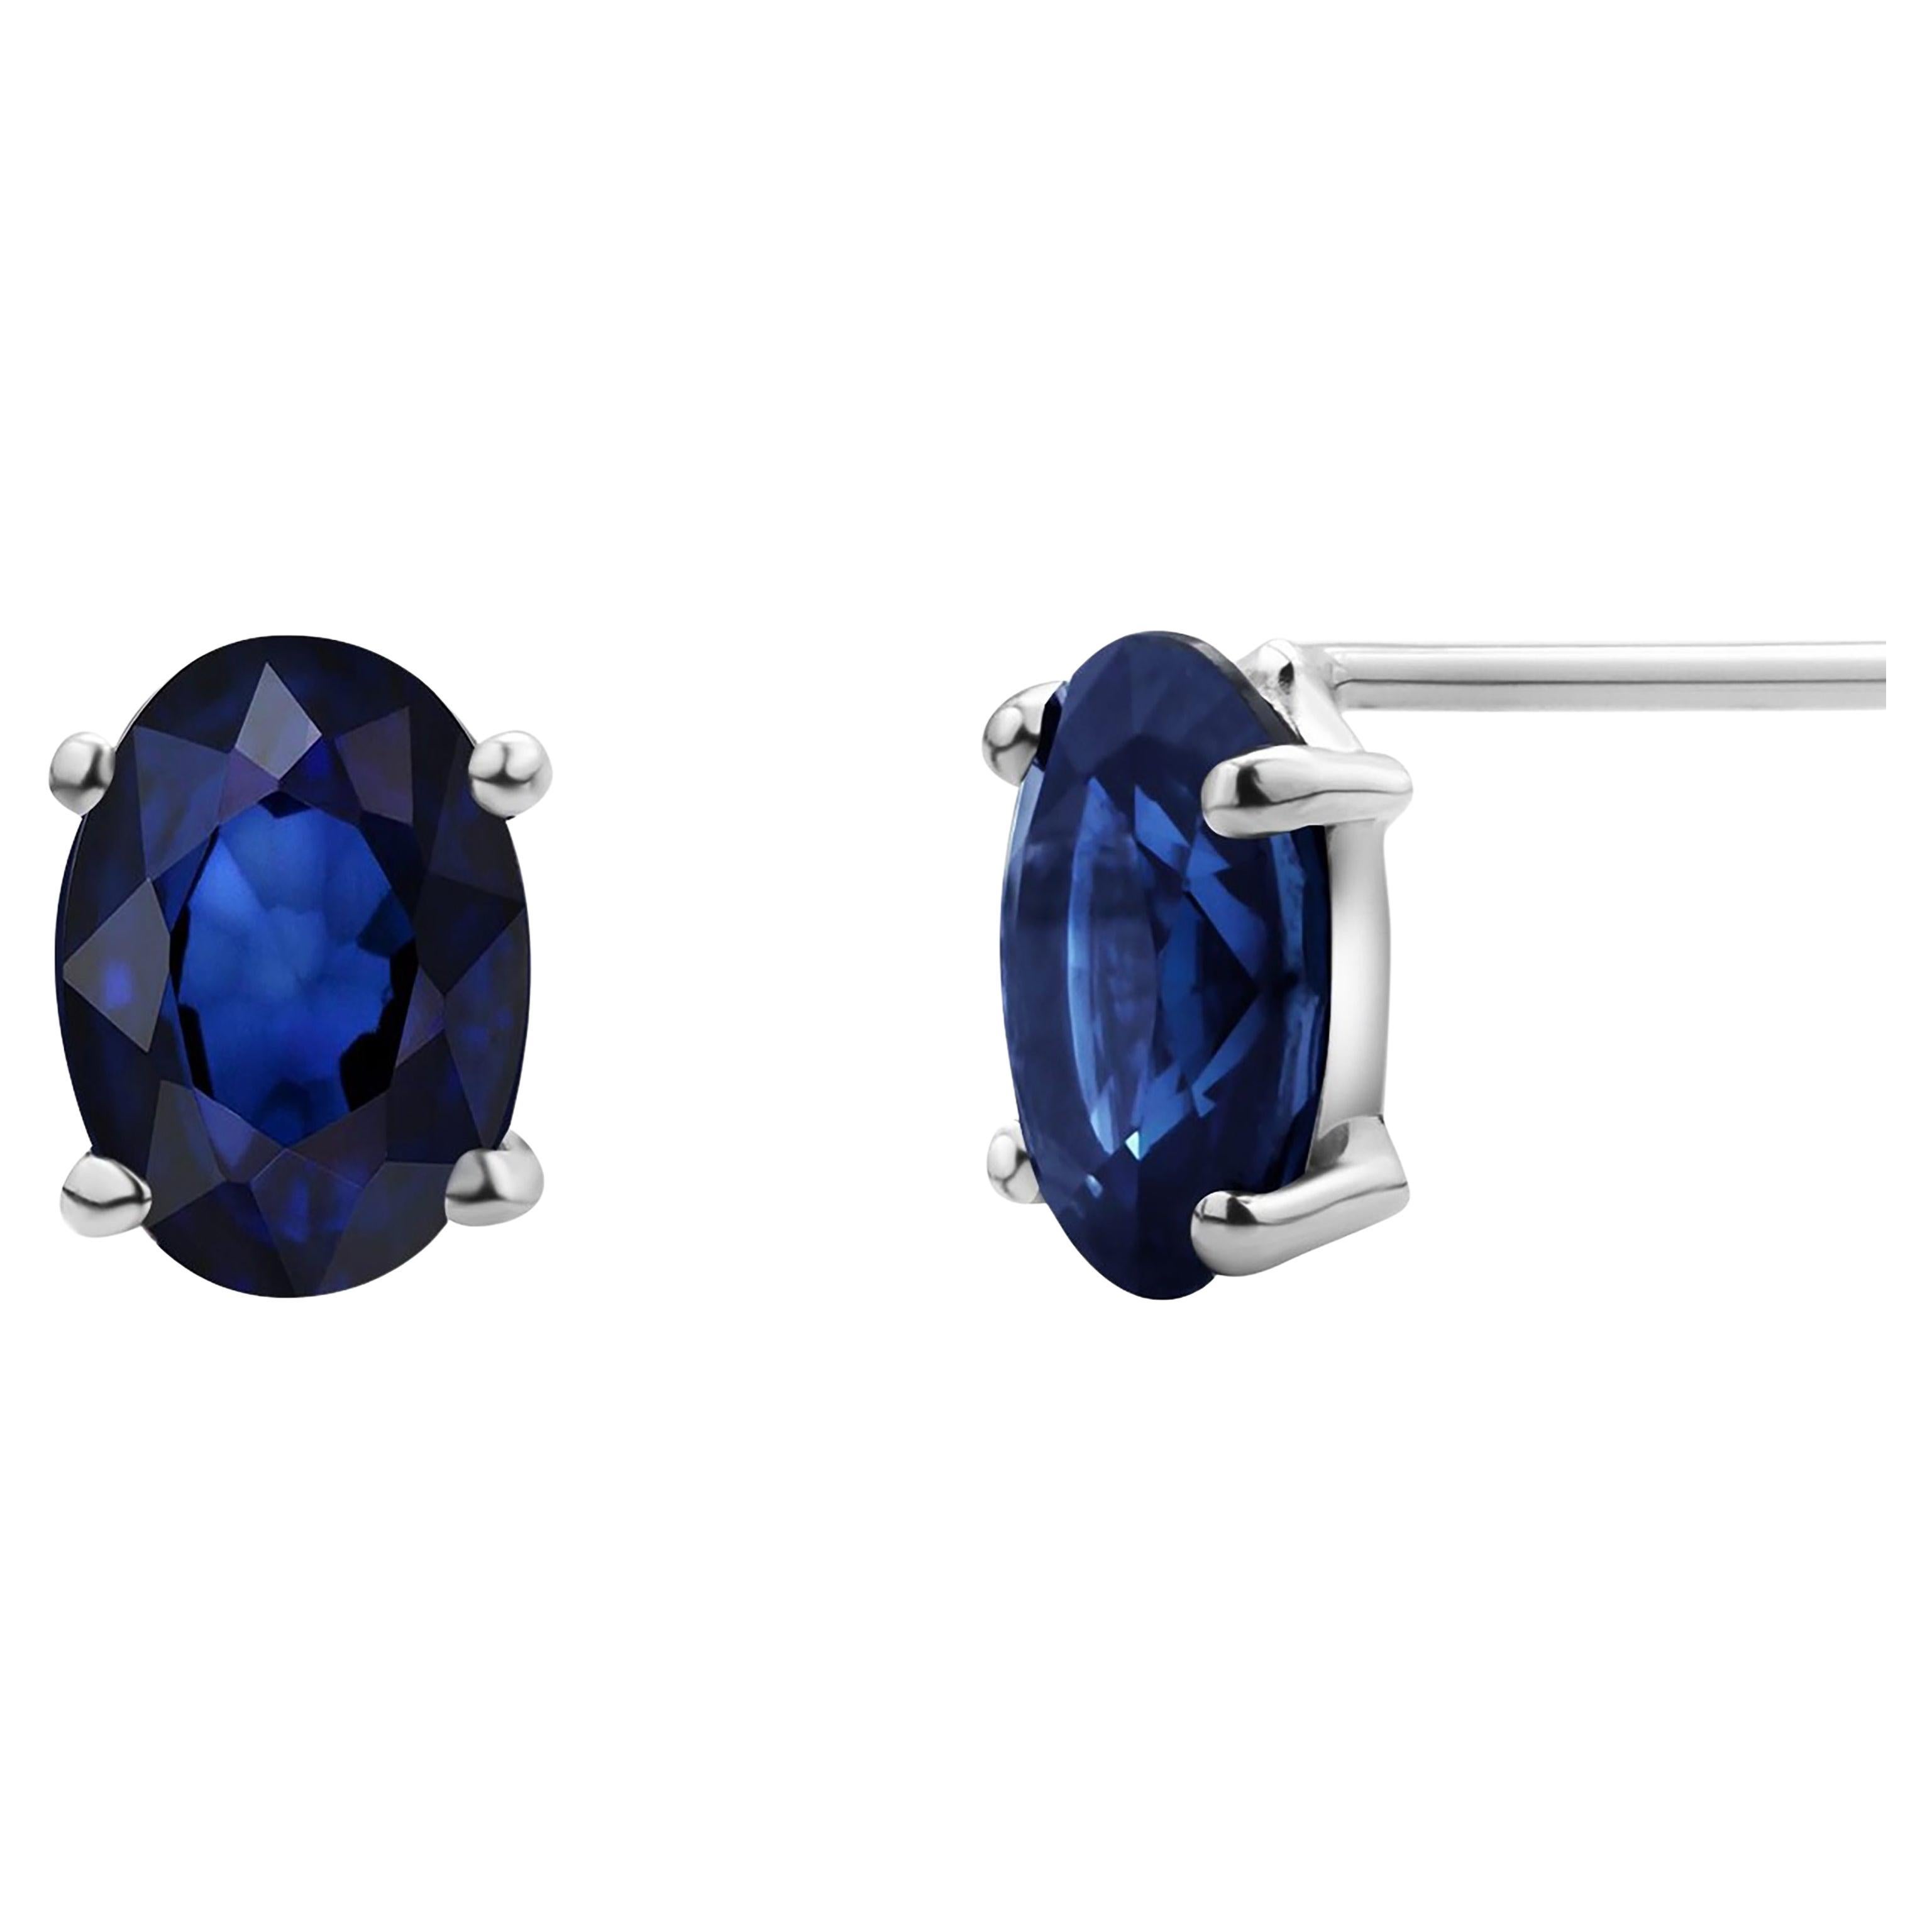 Matched Oval Sapphire 1.80 Carat White Gold 0.27 Inch Long Stud Earrings